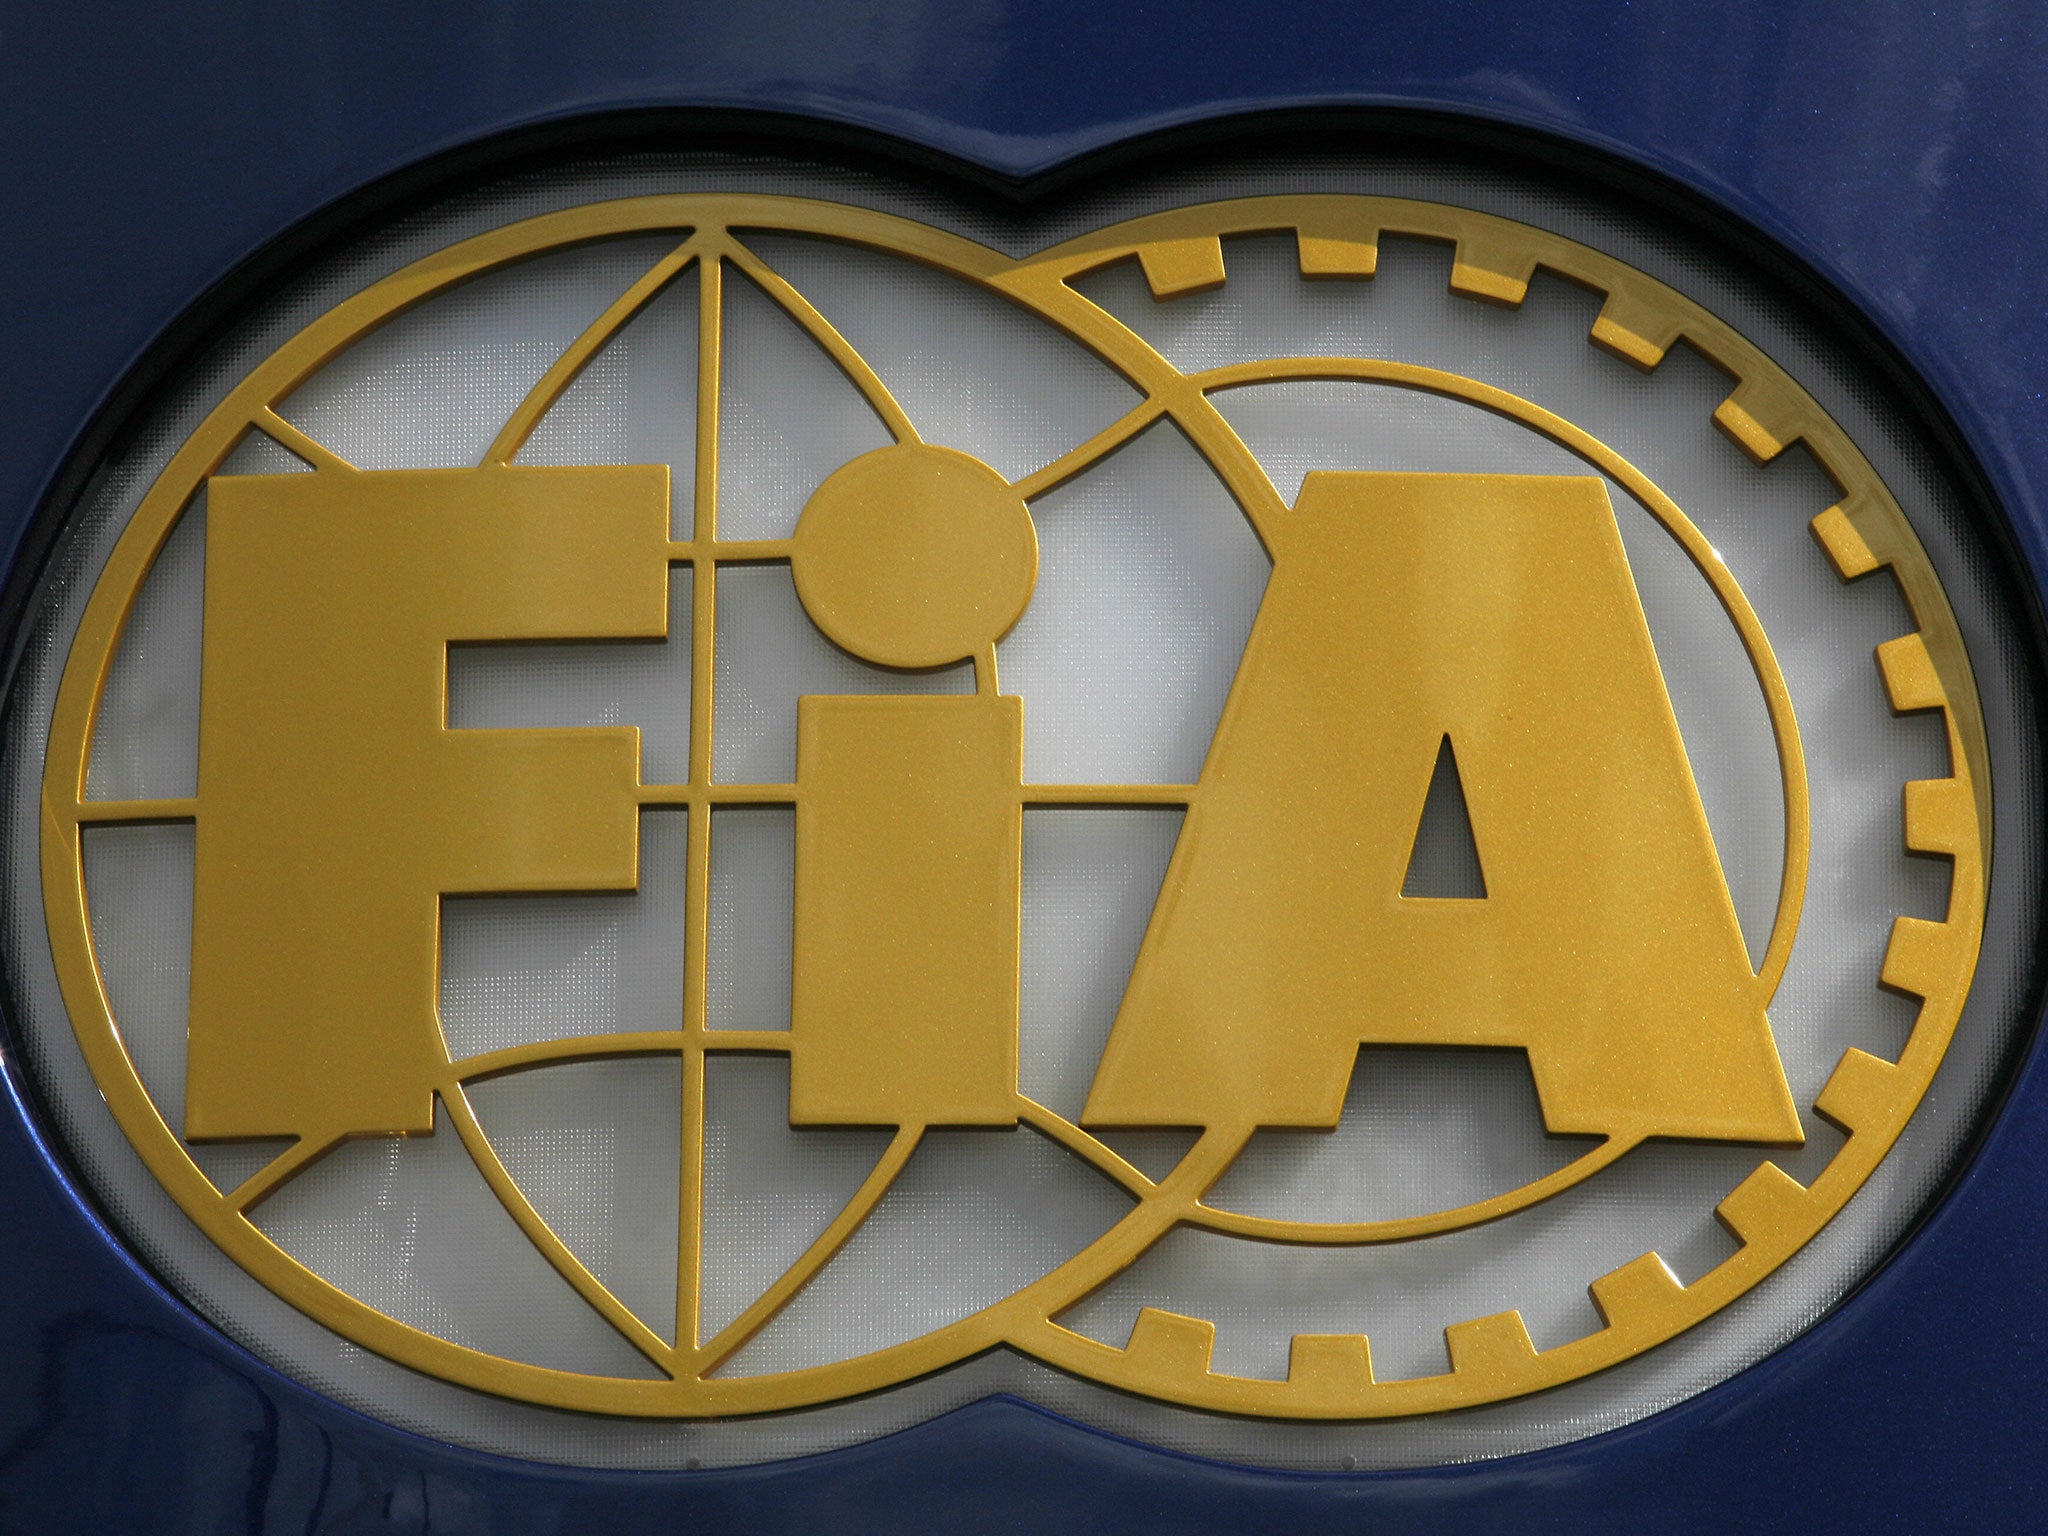 The FIA received a £3.9m payment from the Formula 1 commercial rights holders